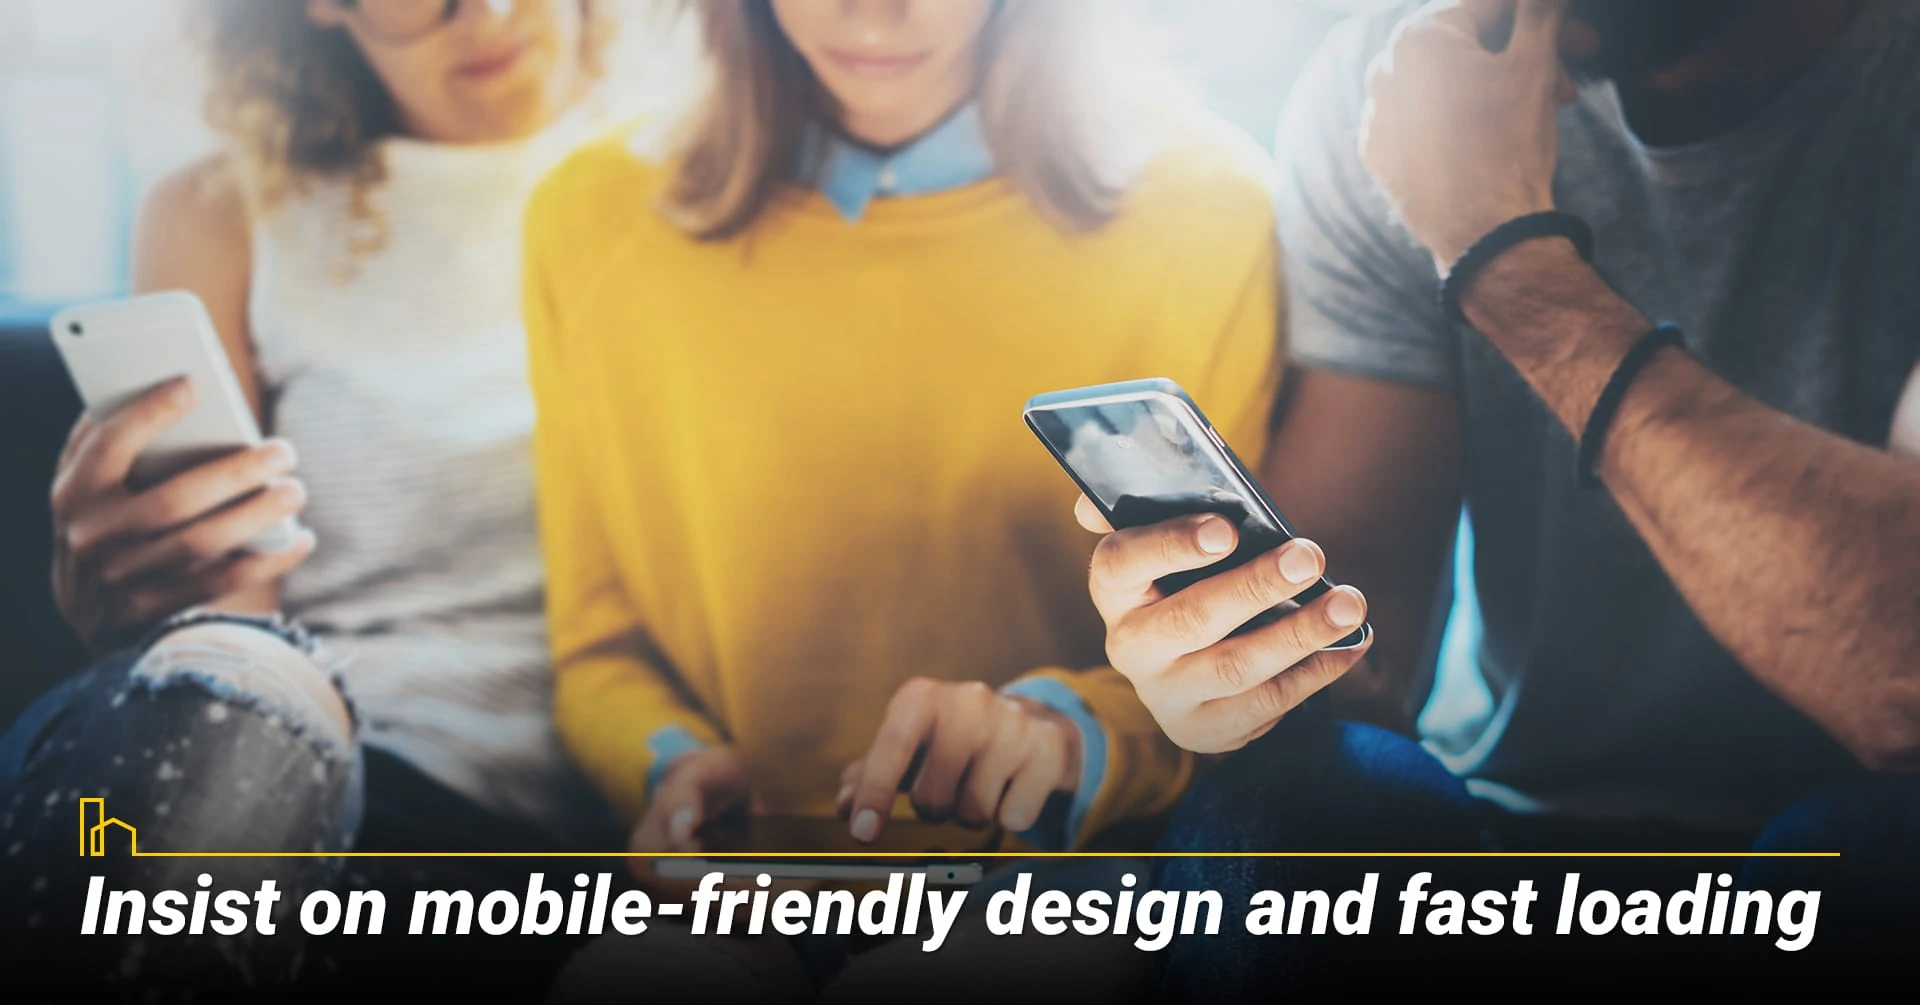 Insist on mobile-friendly design, attractive presentation, and fast loading